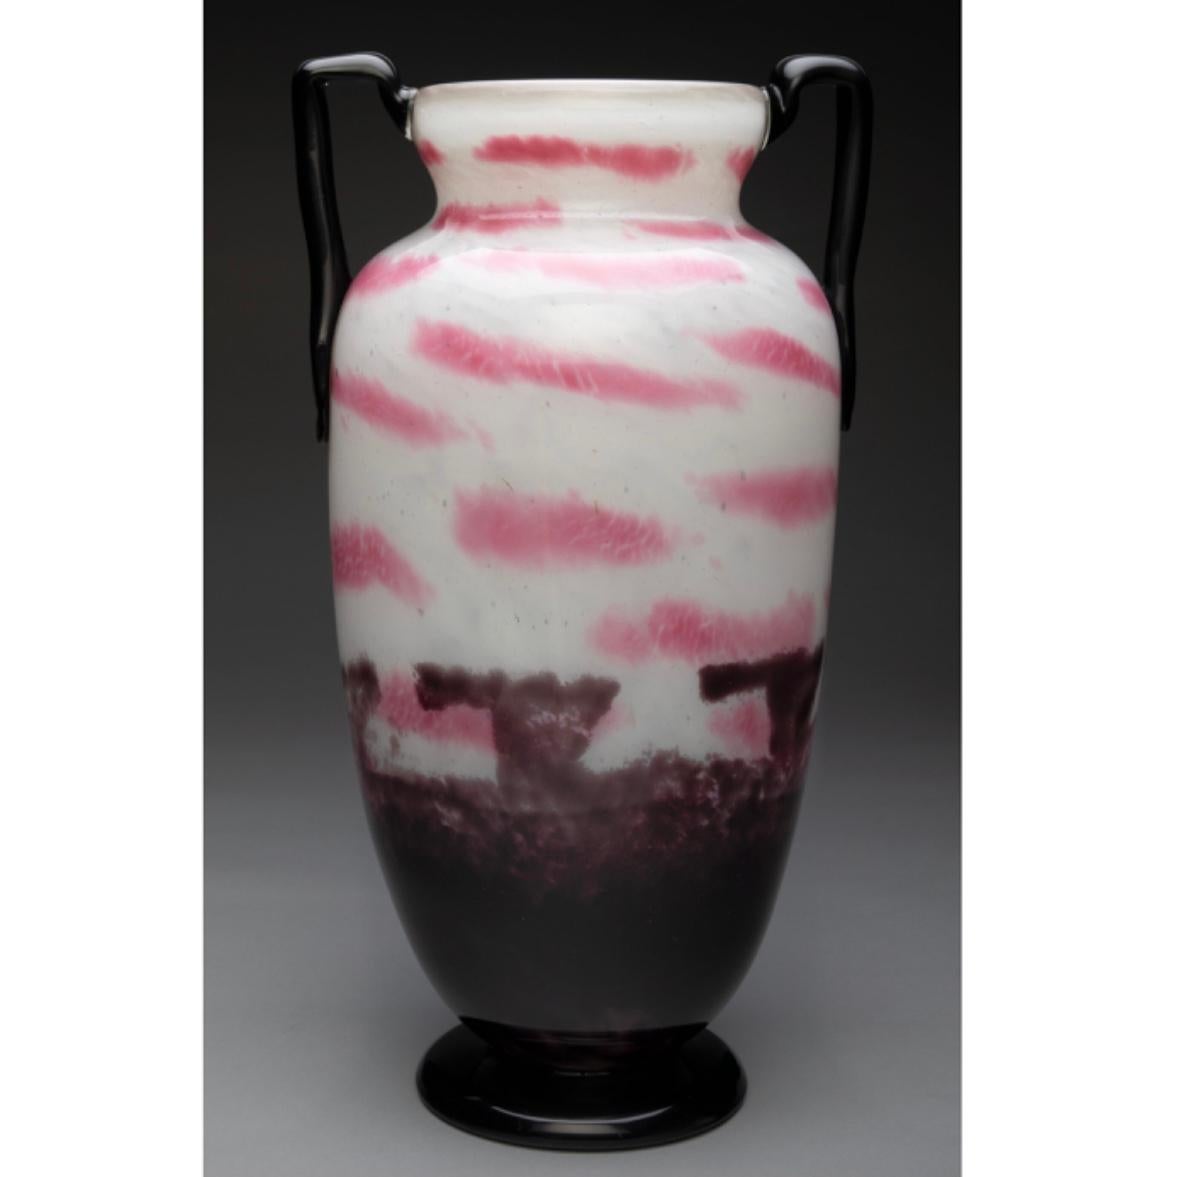 Monumental Schneider Mottled Glass Two-Handled Vase, circa 1920
Marks: Schneider, MADE IN FRANCE, G 16/2
Height: 22.75 inches (57.8 cm)
Diameter: 12.25 Inches
Art Deco decorated forms and design.

Condition: In overall very good condition, no issues